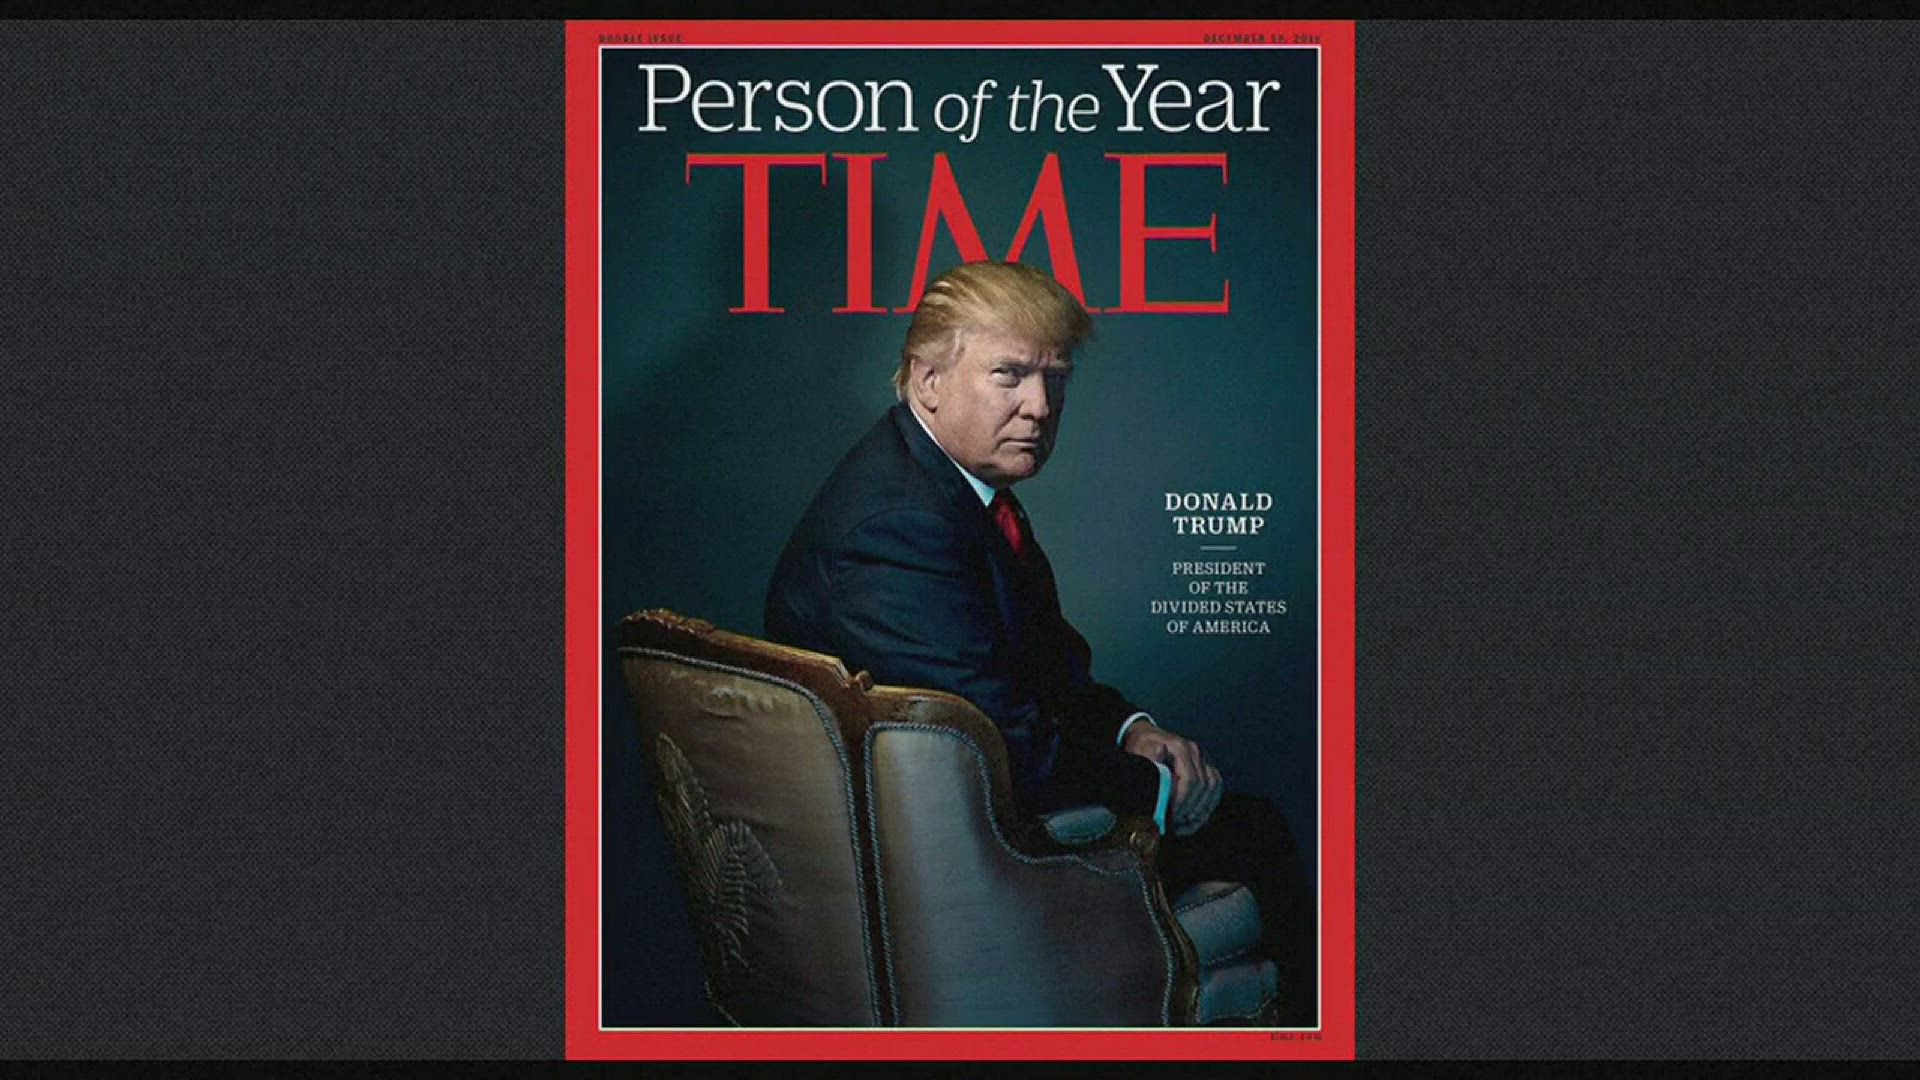 TIME named U.S. President-elect Donald Trump its person of the year on NBC's Today Show on Wednesday morning.